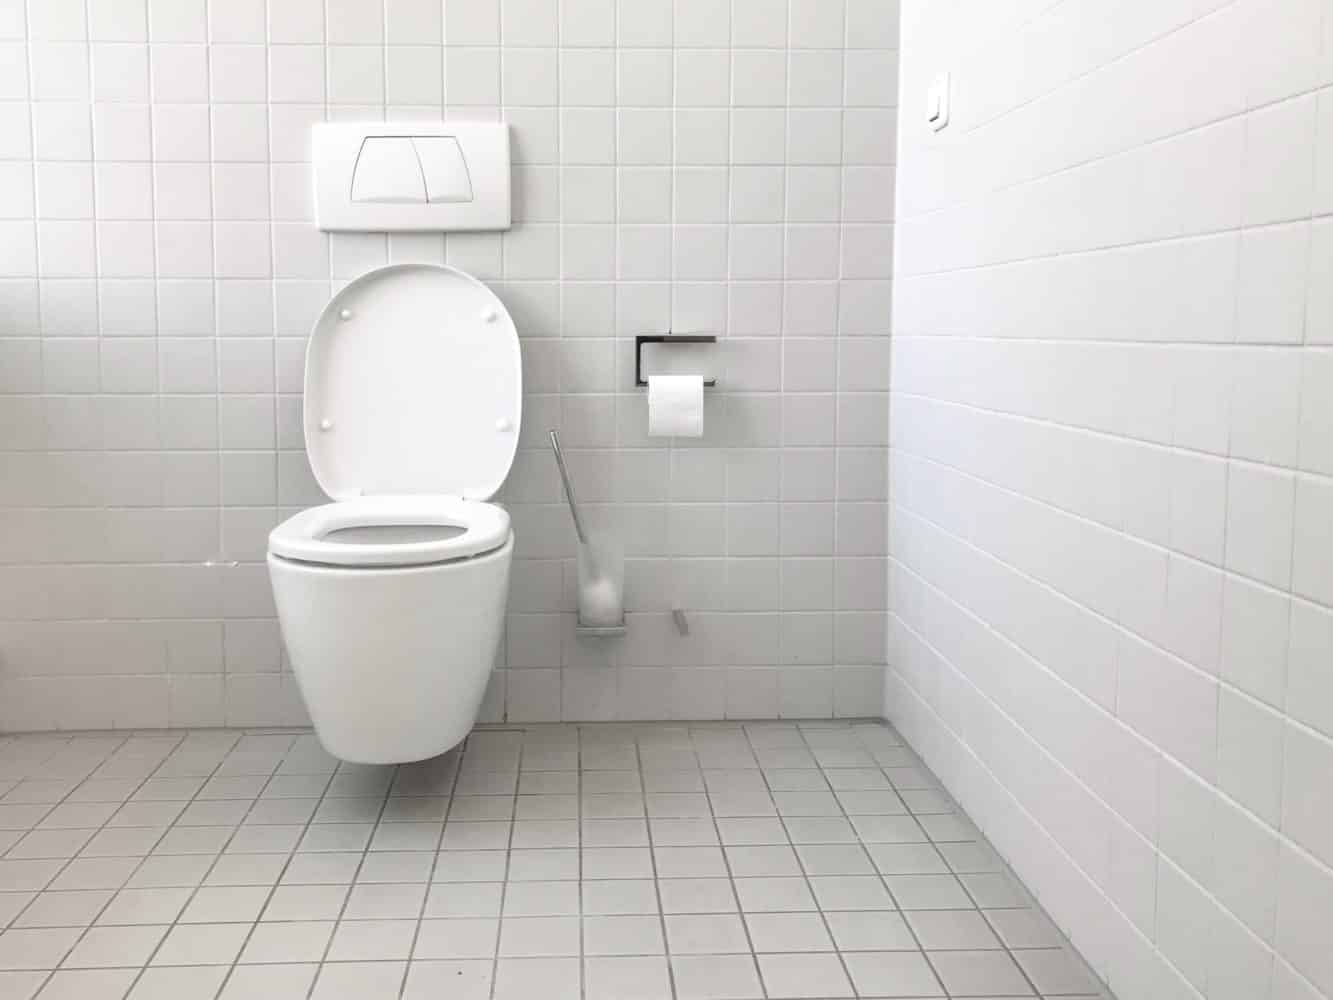 Toilet in Bathroom with White Tile